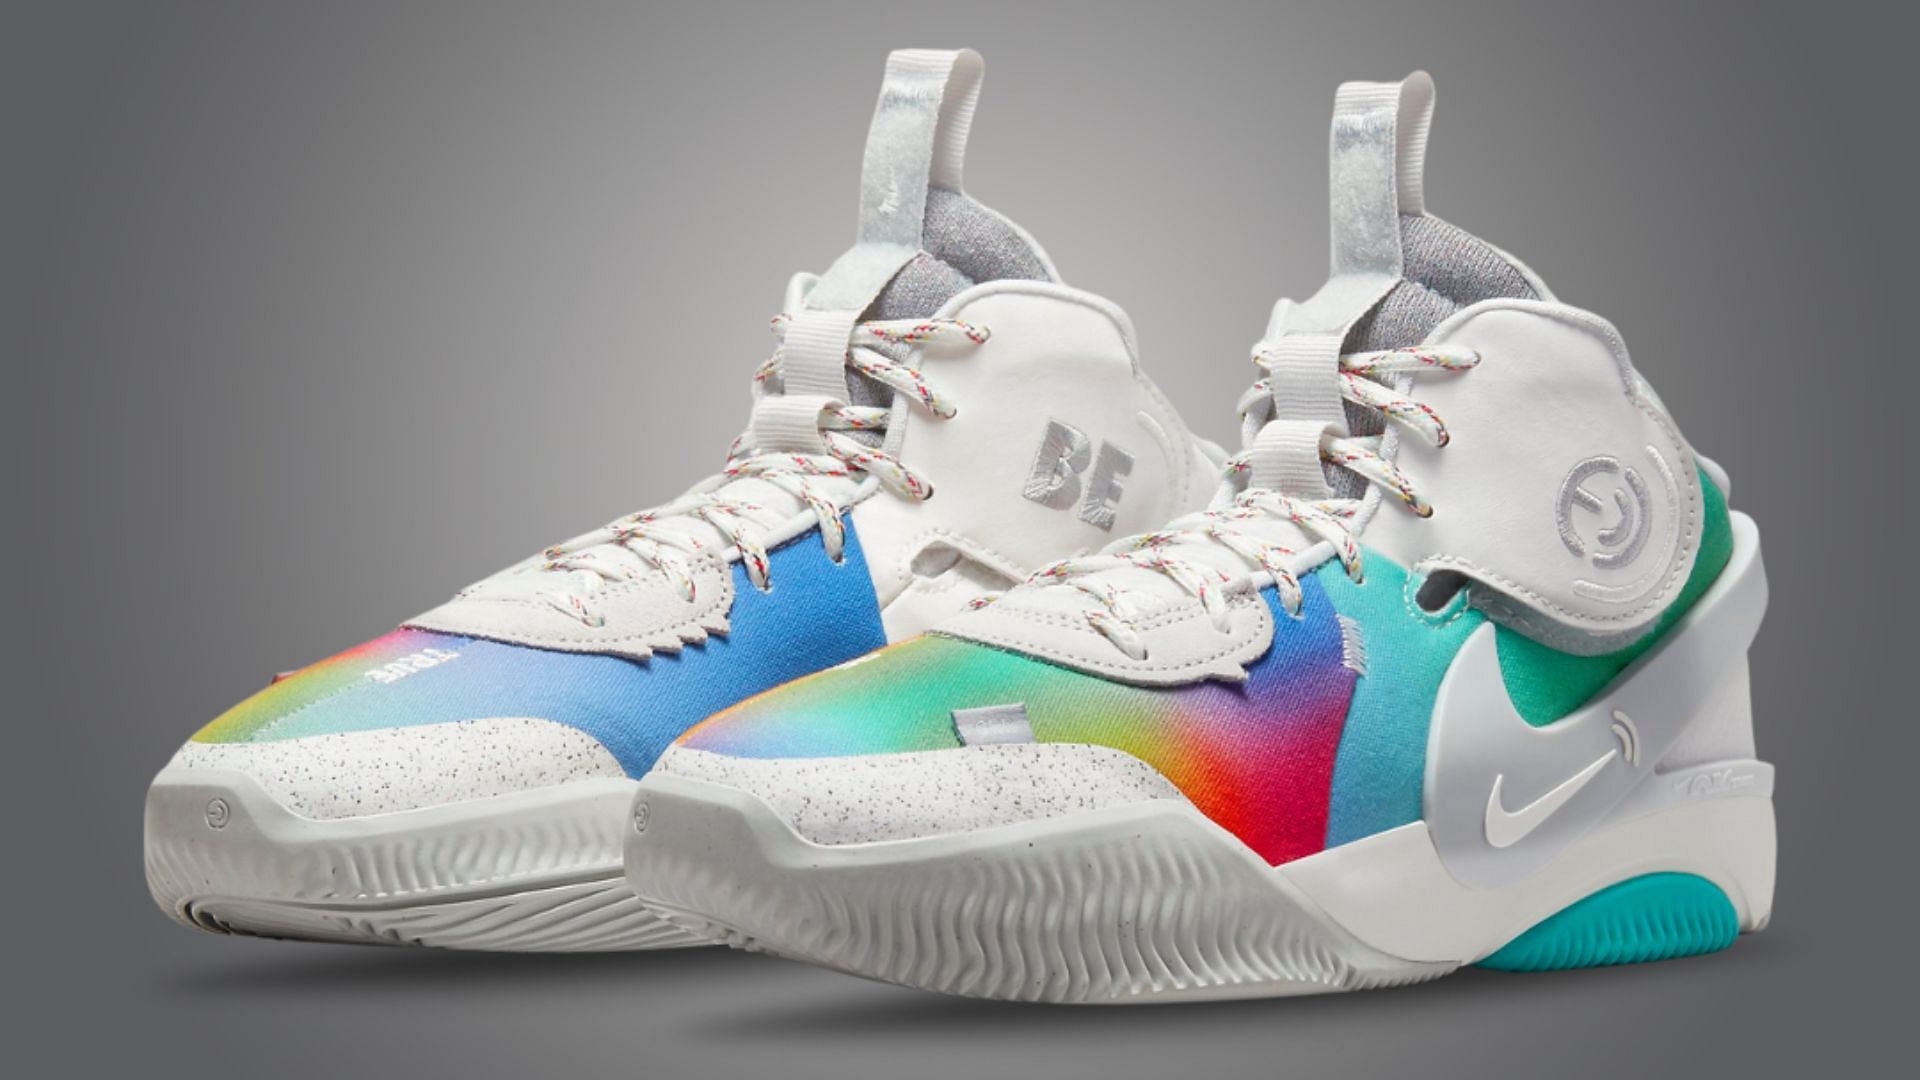 Where to buy Elena Delle Donne x Nike Air Deldon 1 “Be True” edition? Price and more details explored